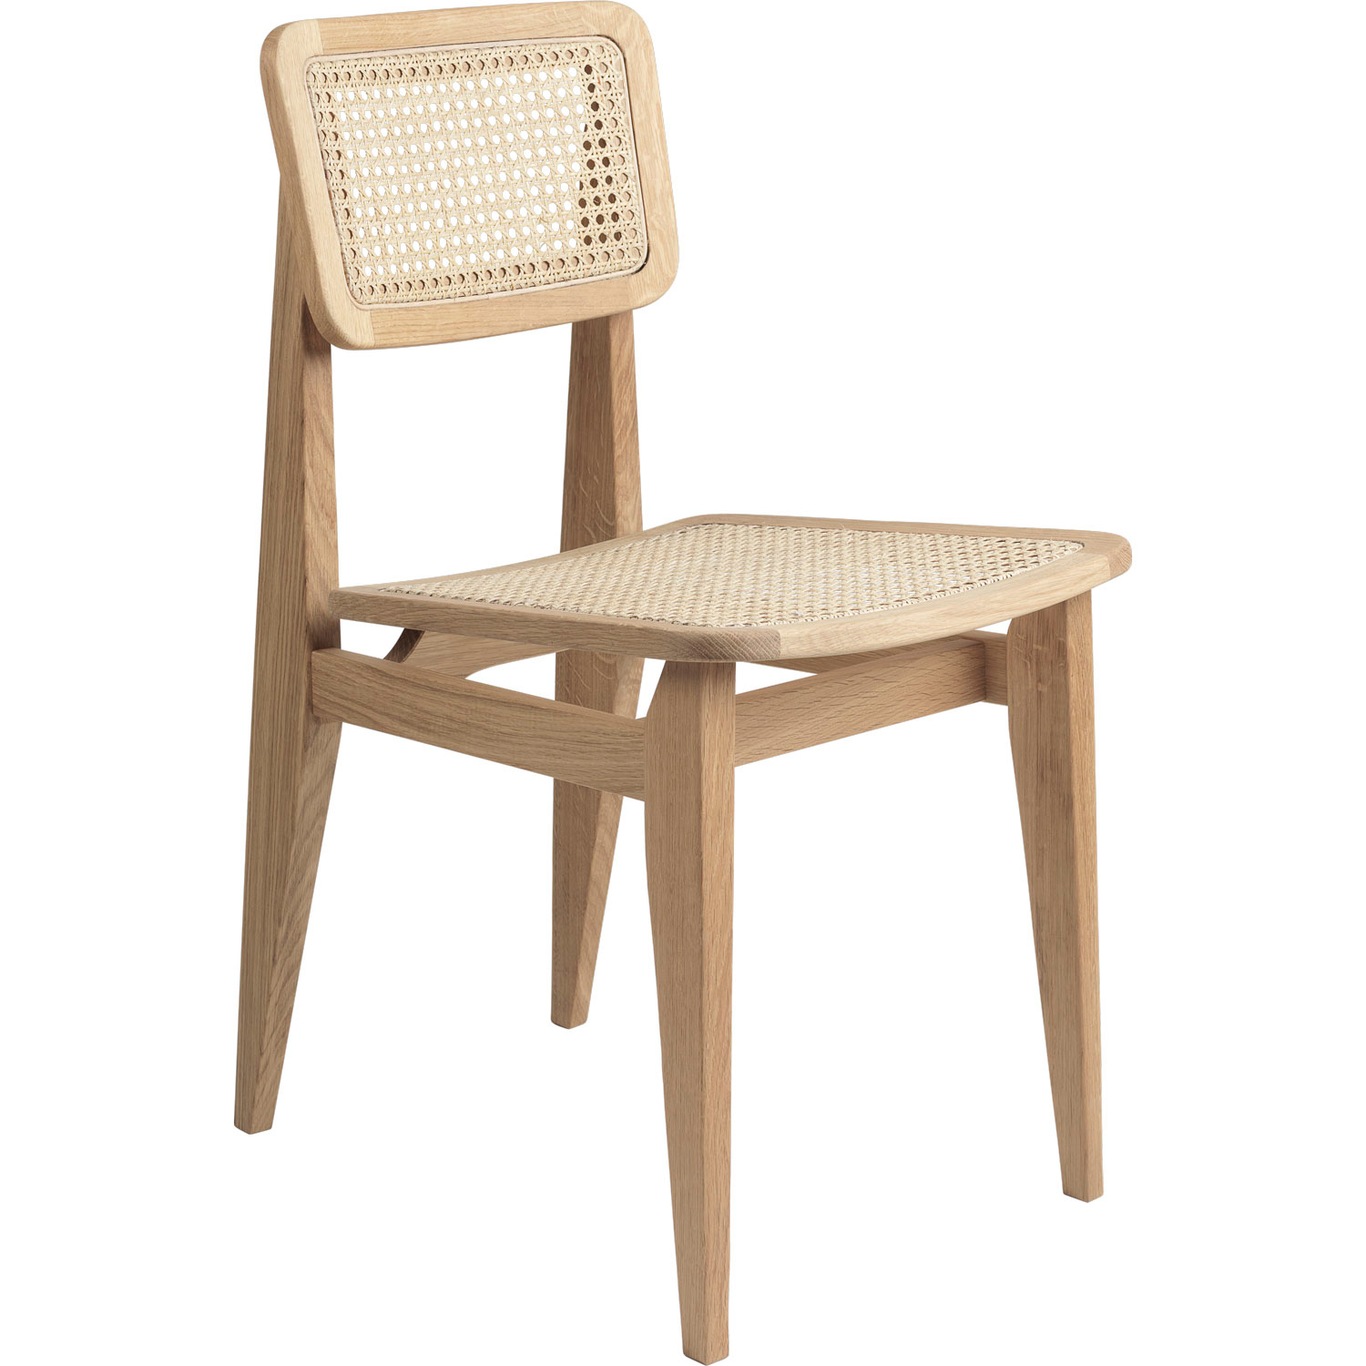 C-Chair Dining Chair, Oiled oak / Cane